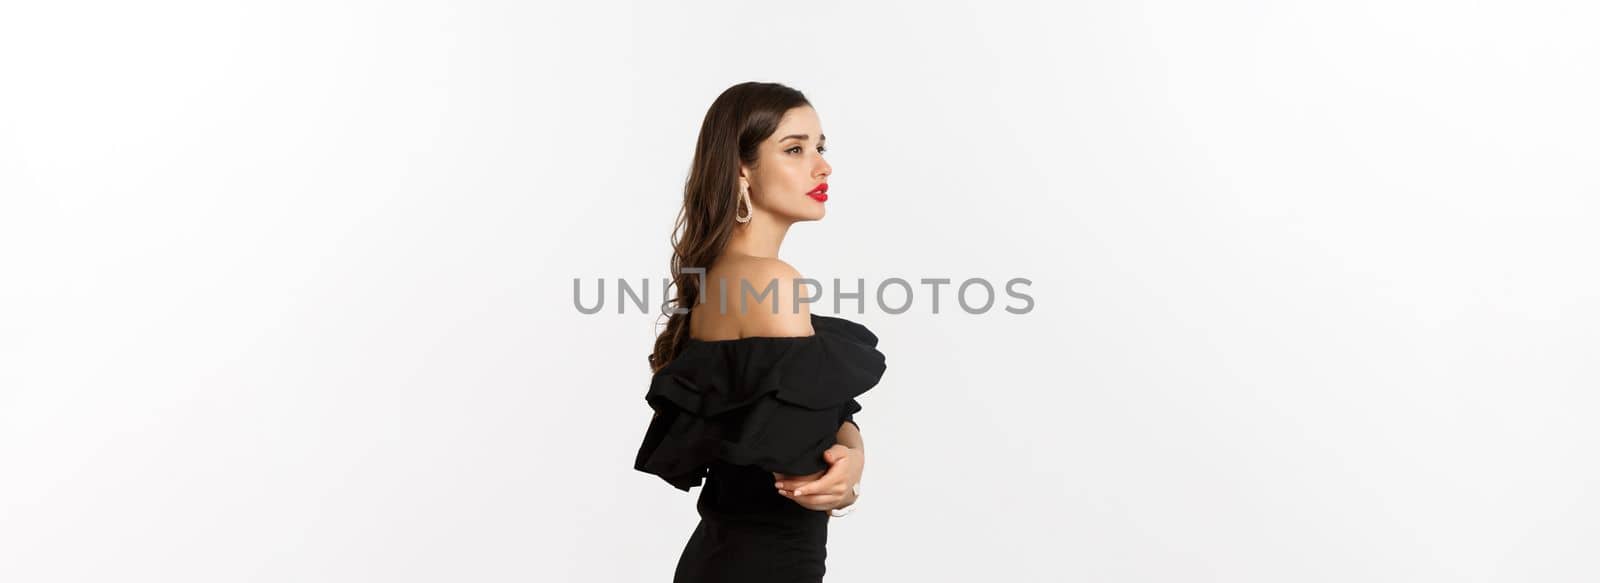 Profile view of elegant young woman with red lips, makeup and black dress, looking dreamy in distance, standing over white background.